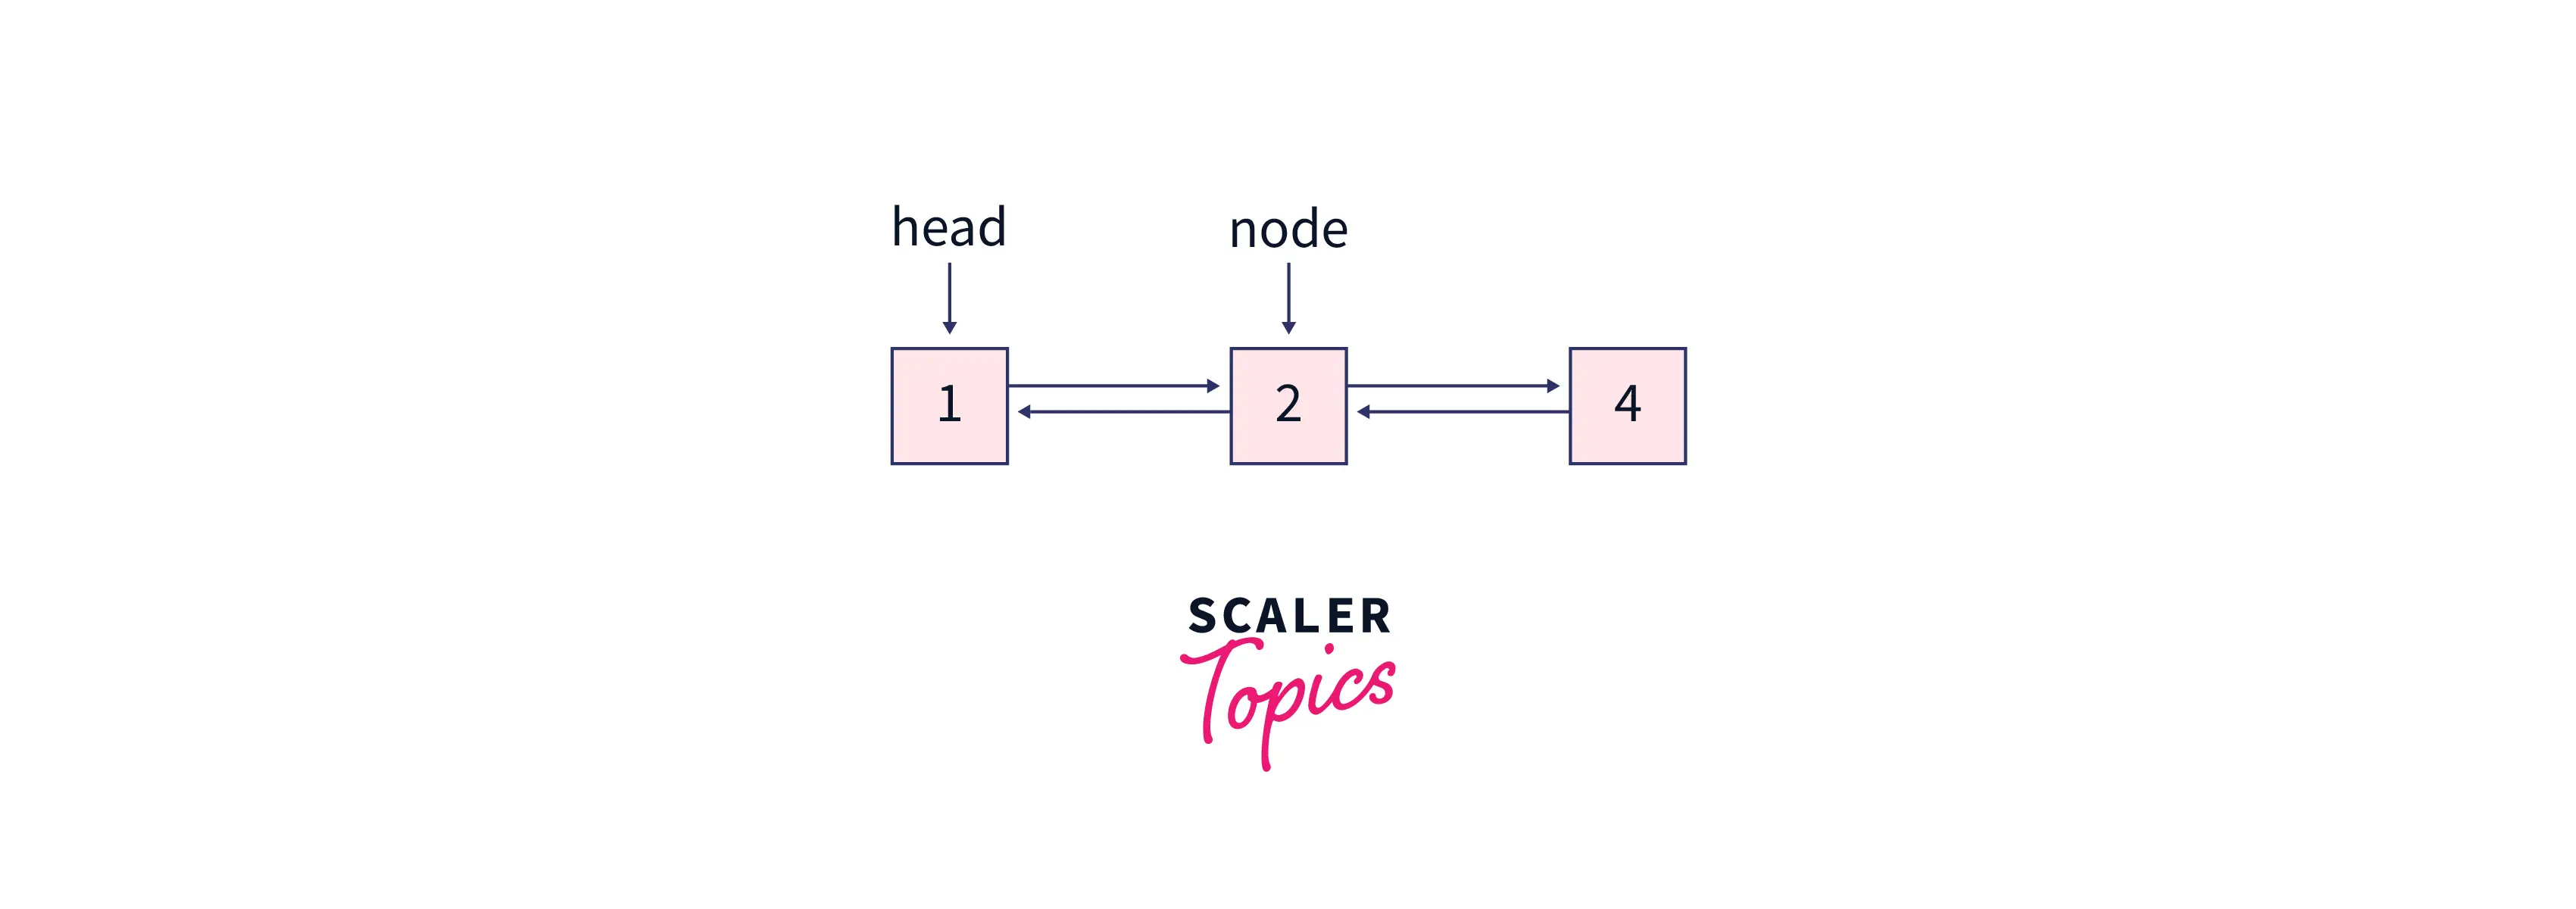 Example for inserting a node after a given node in a Doubly Linked List